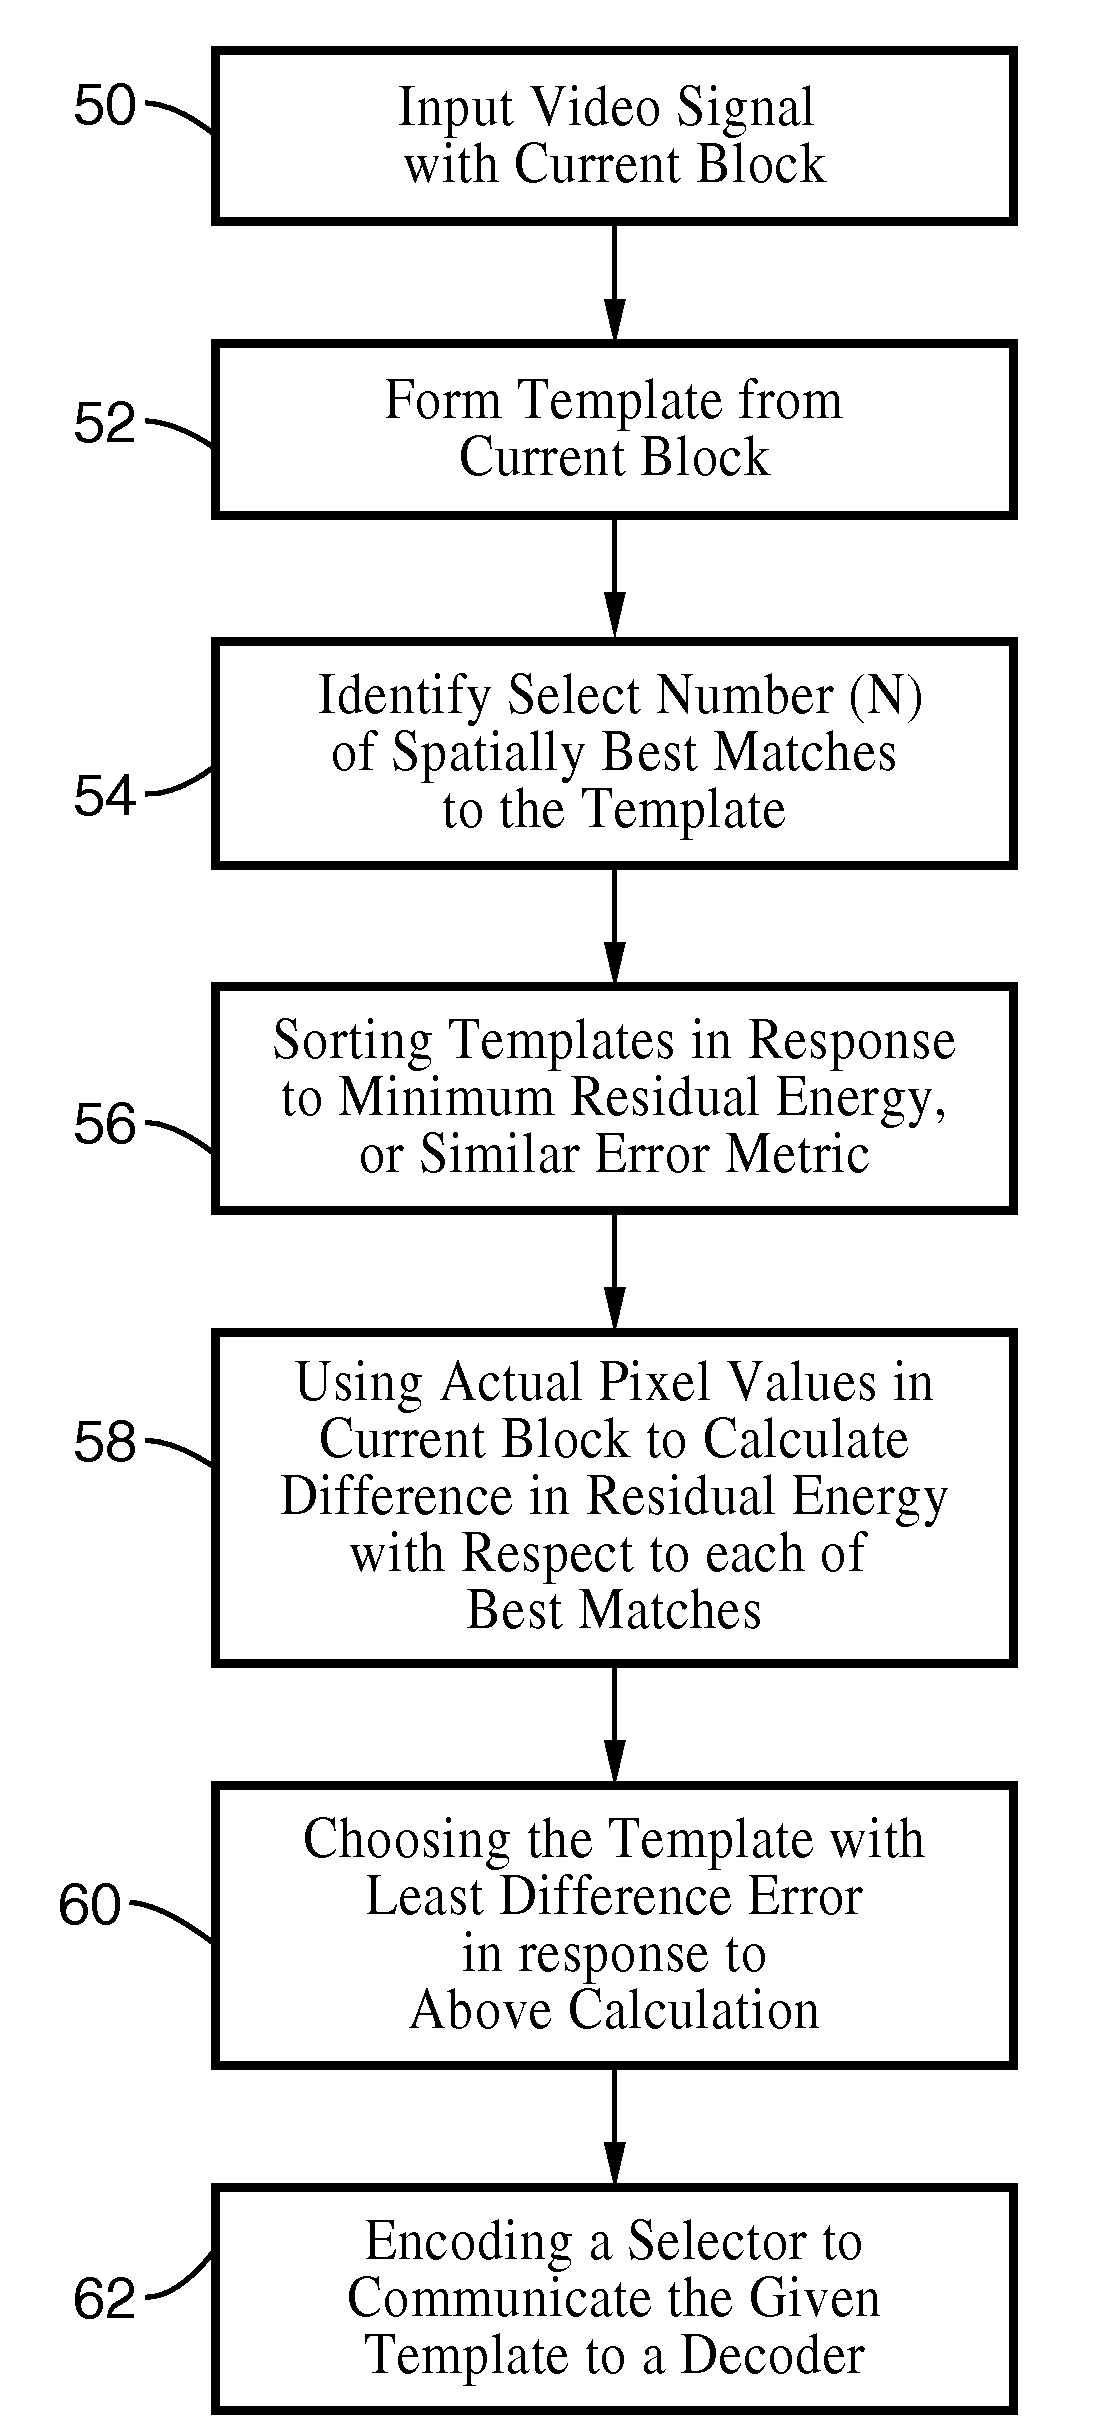 Template matching scheme using multiple predictors as candidates for intra-prediction